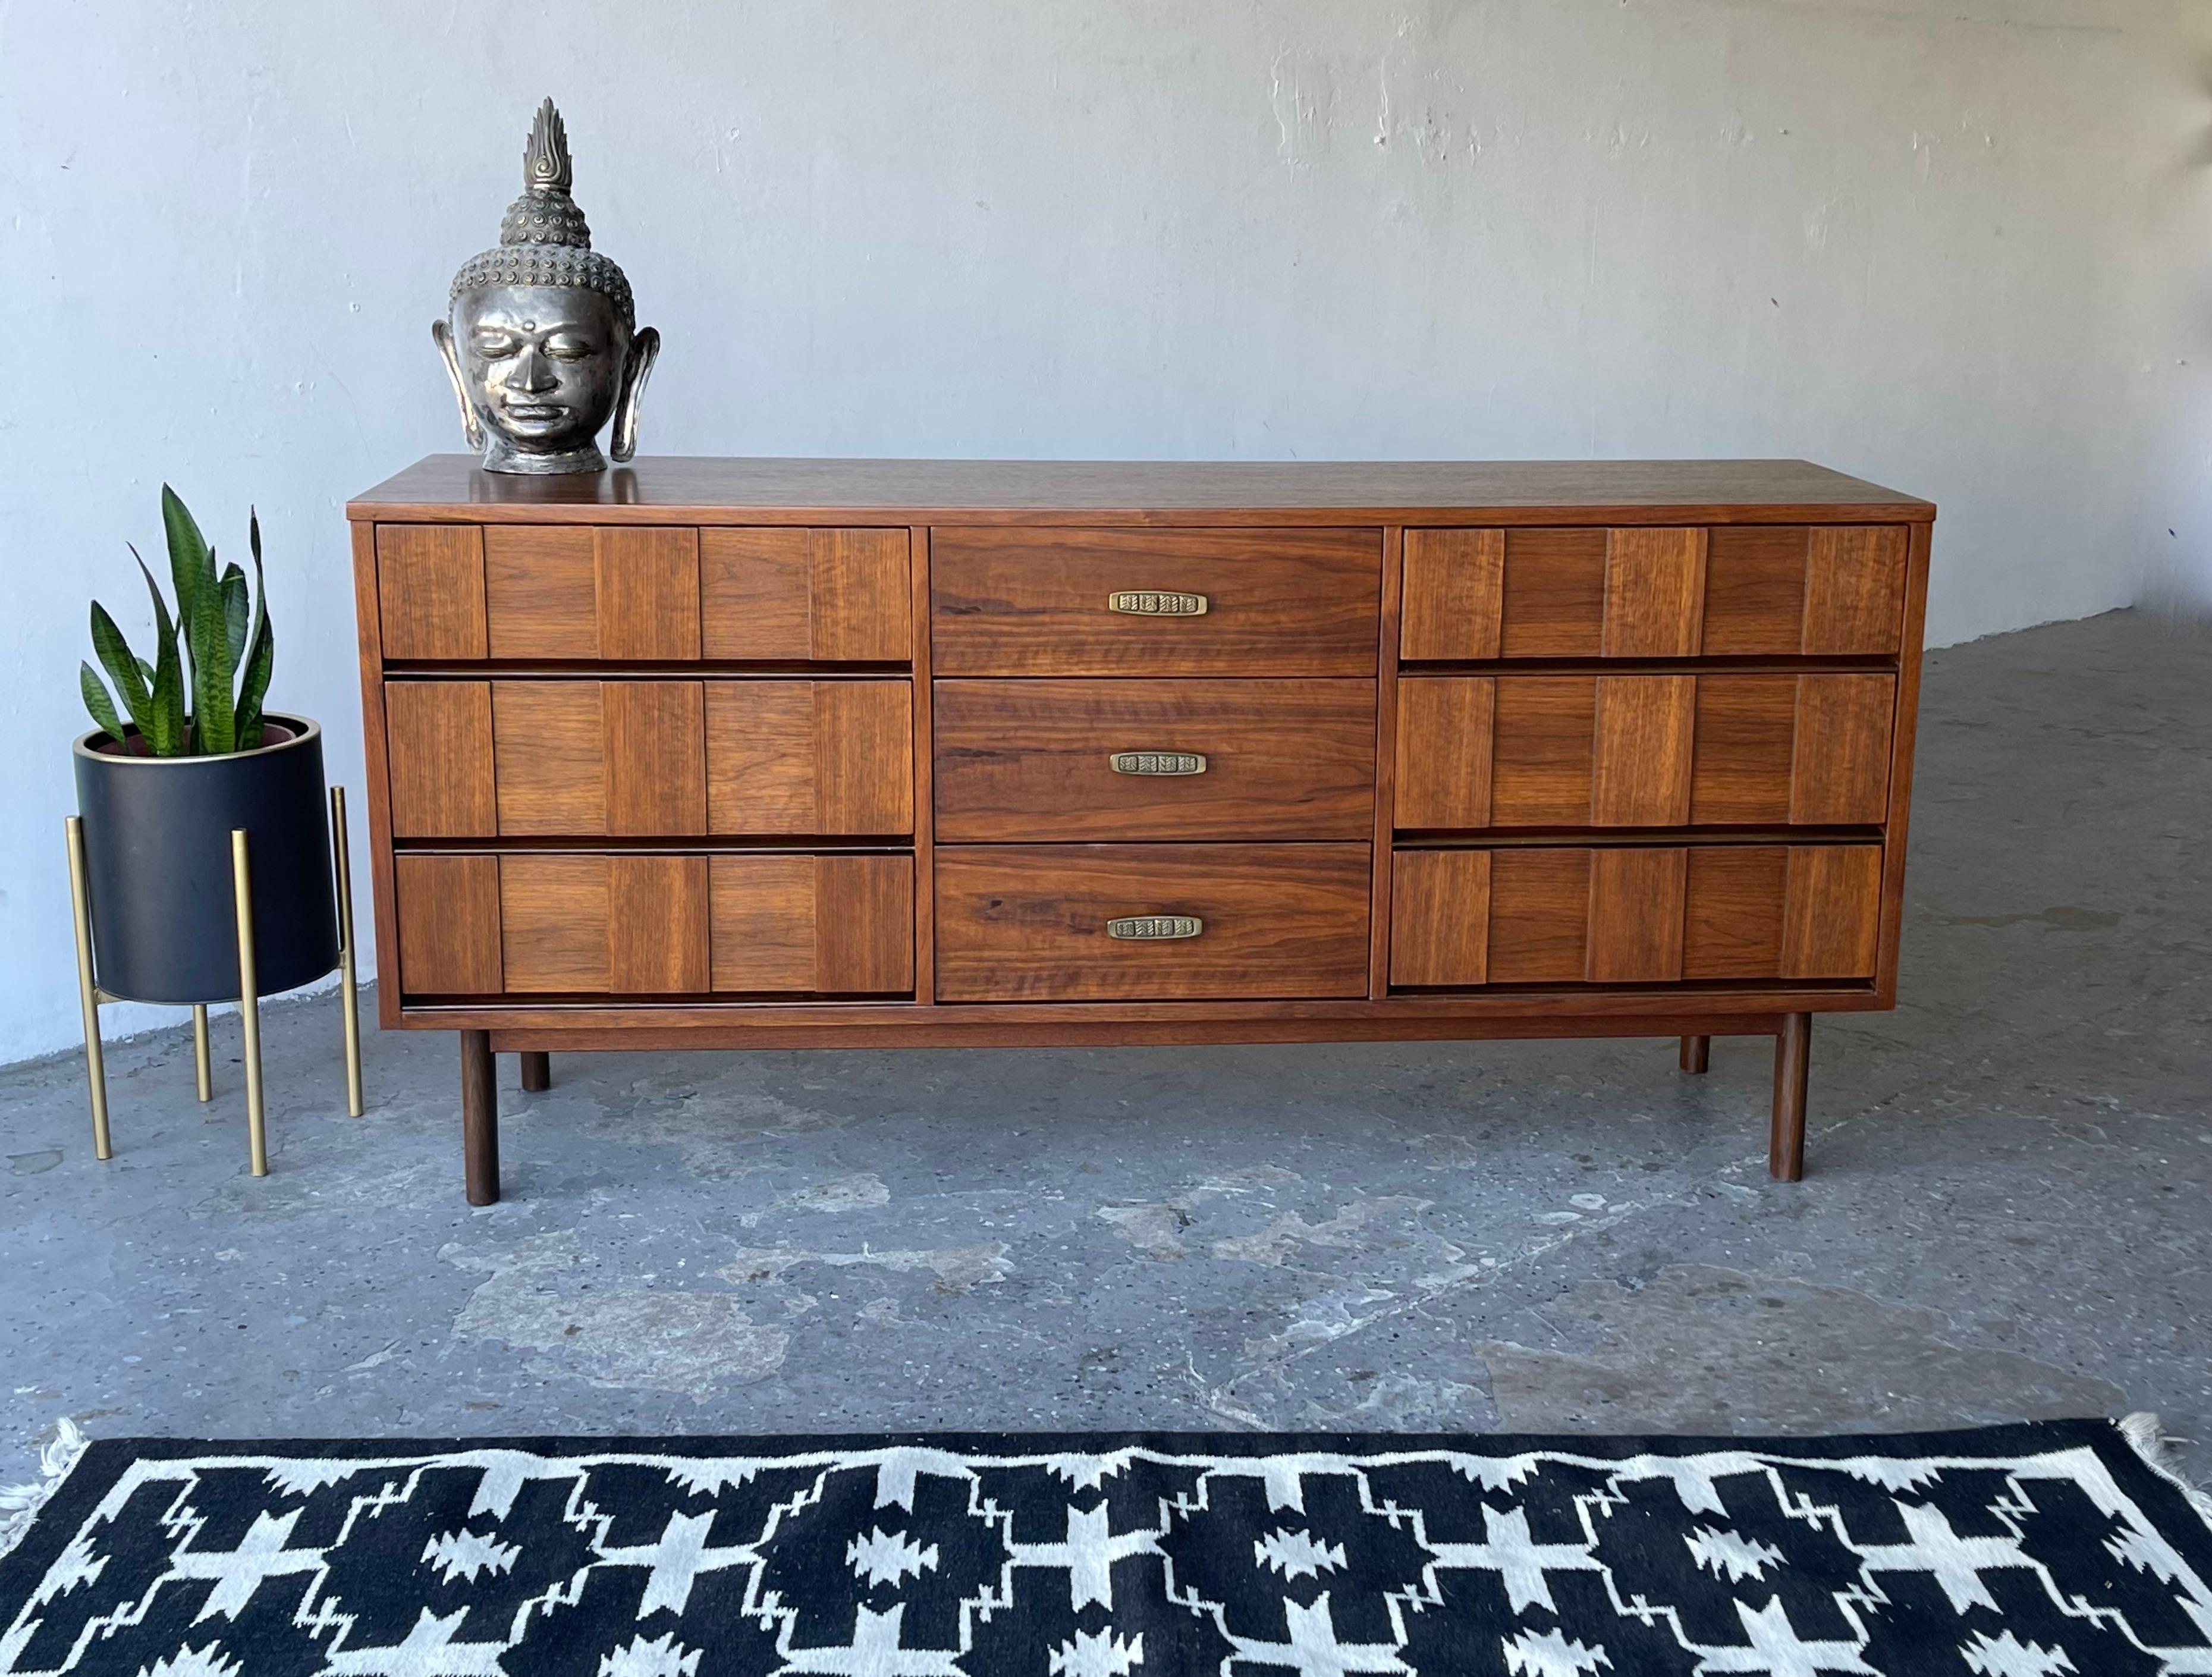 Beautiful Mid-Century Modern Bassett furniture low-boy dresser

64” wide 18” deep 30” high

Professionally refinished and restored

 Last Picture shows matching high boy dresser listed separately.